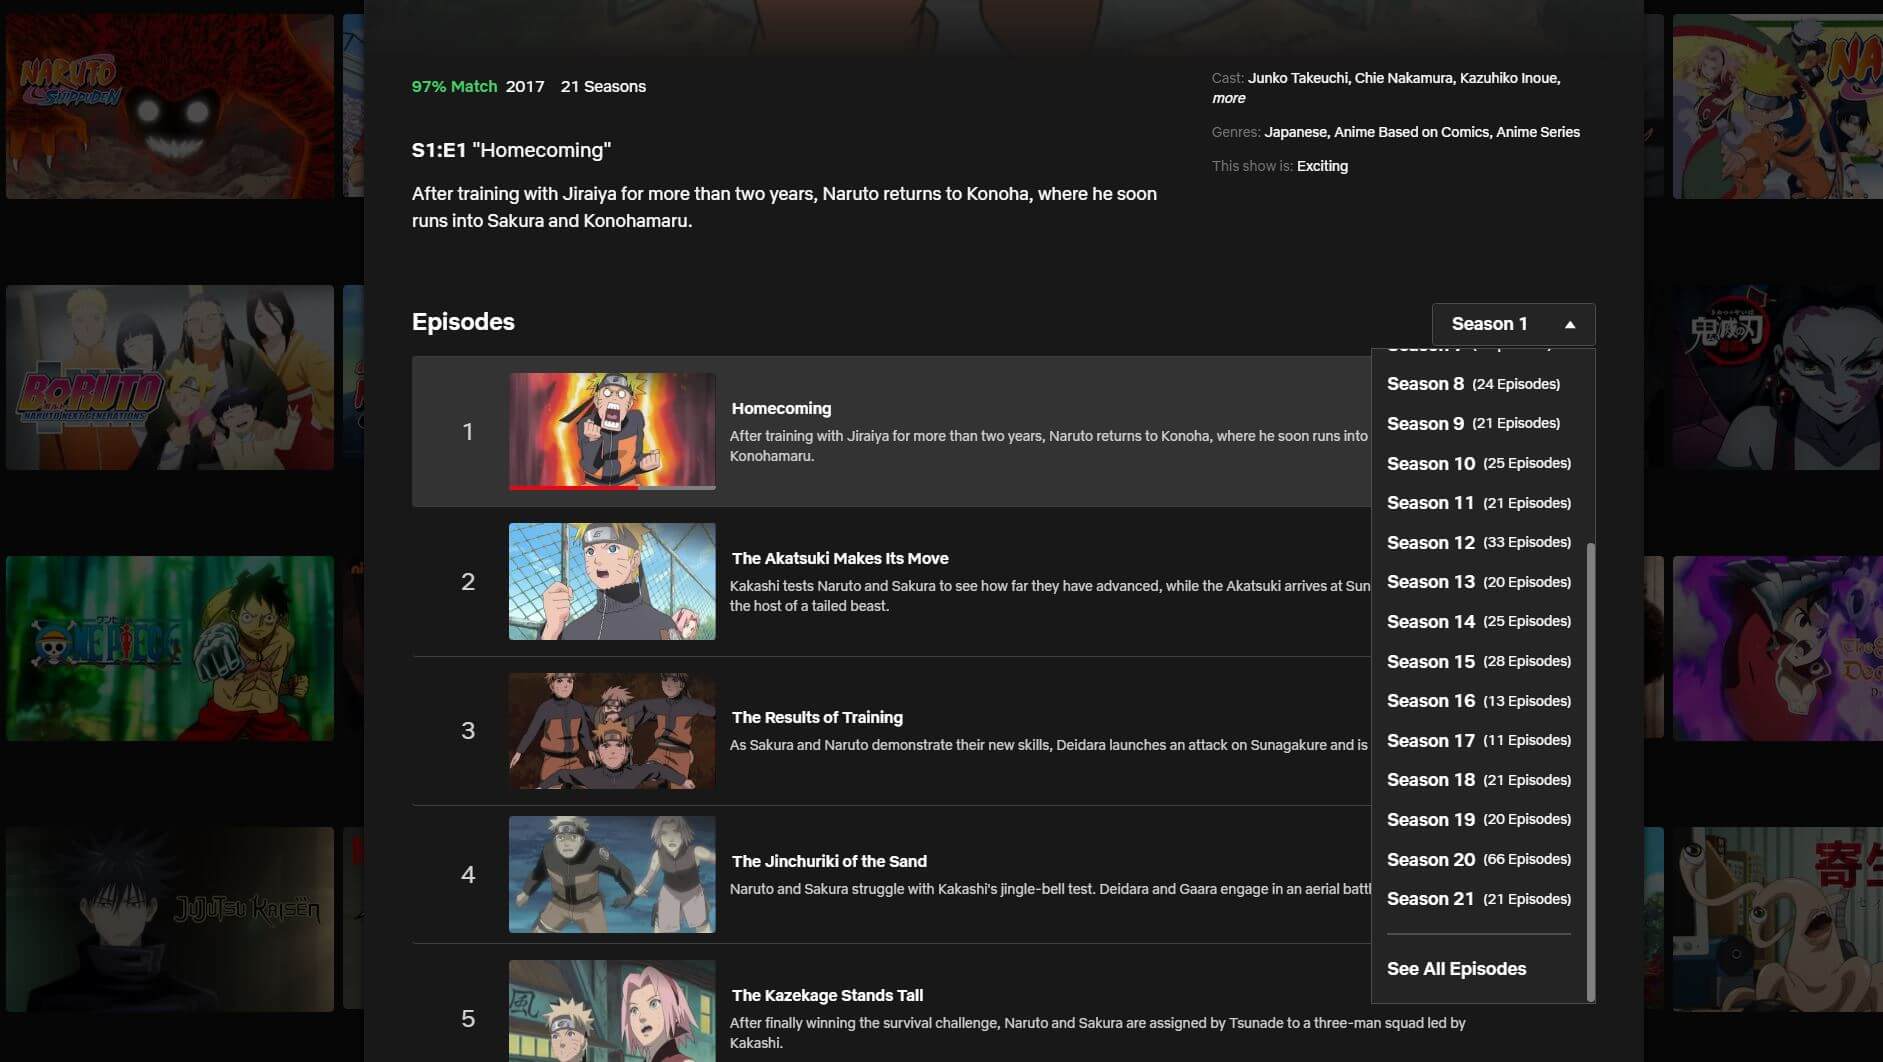 How to Find and Watch Naruto Shippuden on Netflix? (21 SEASONS)